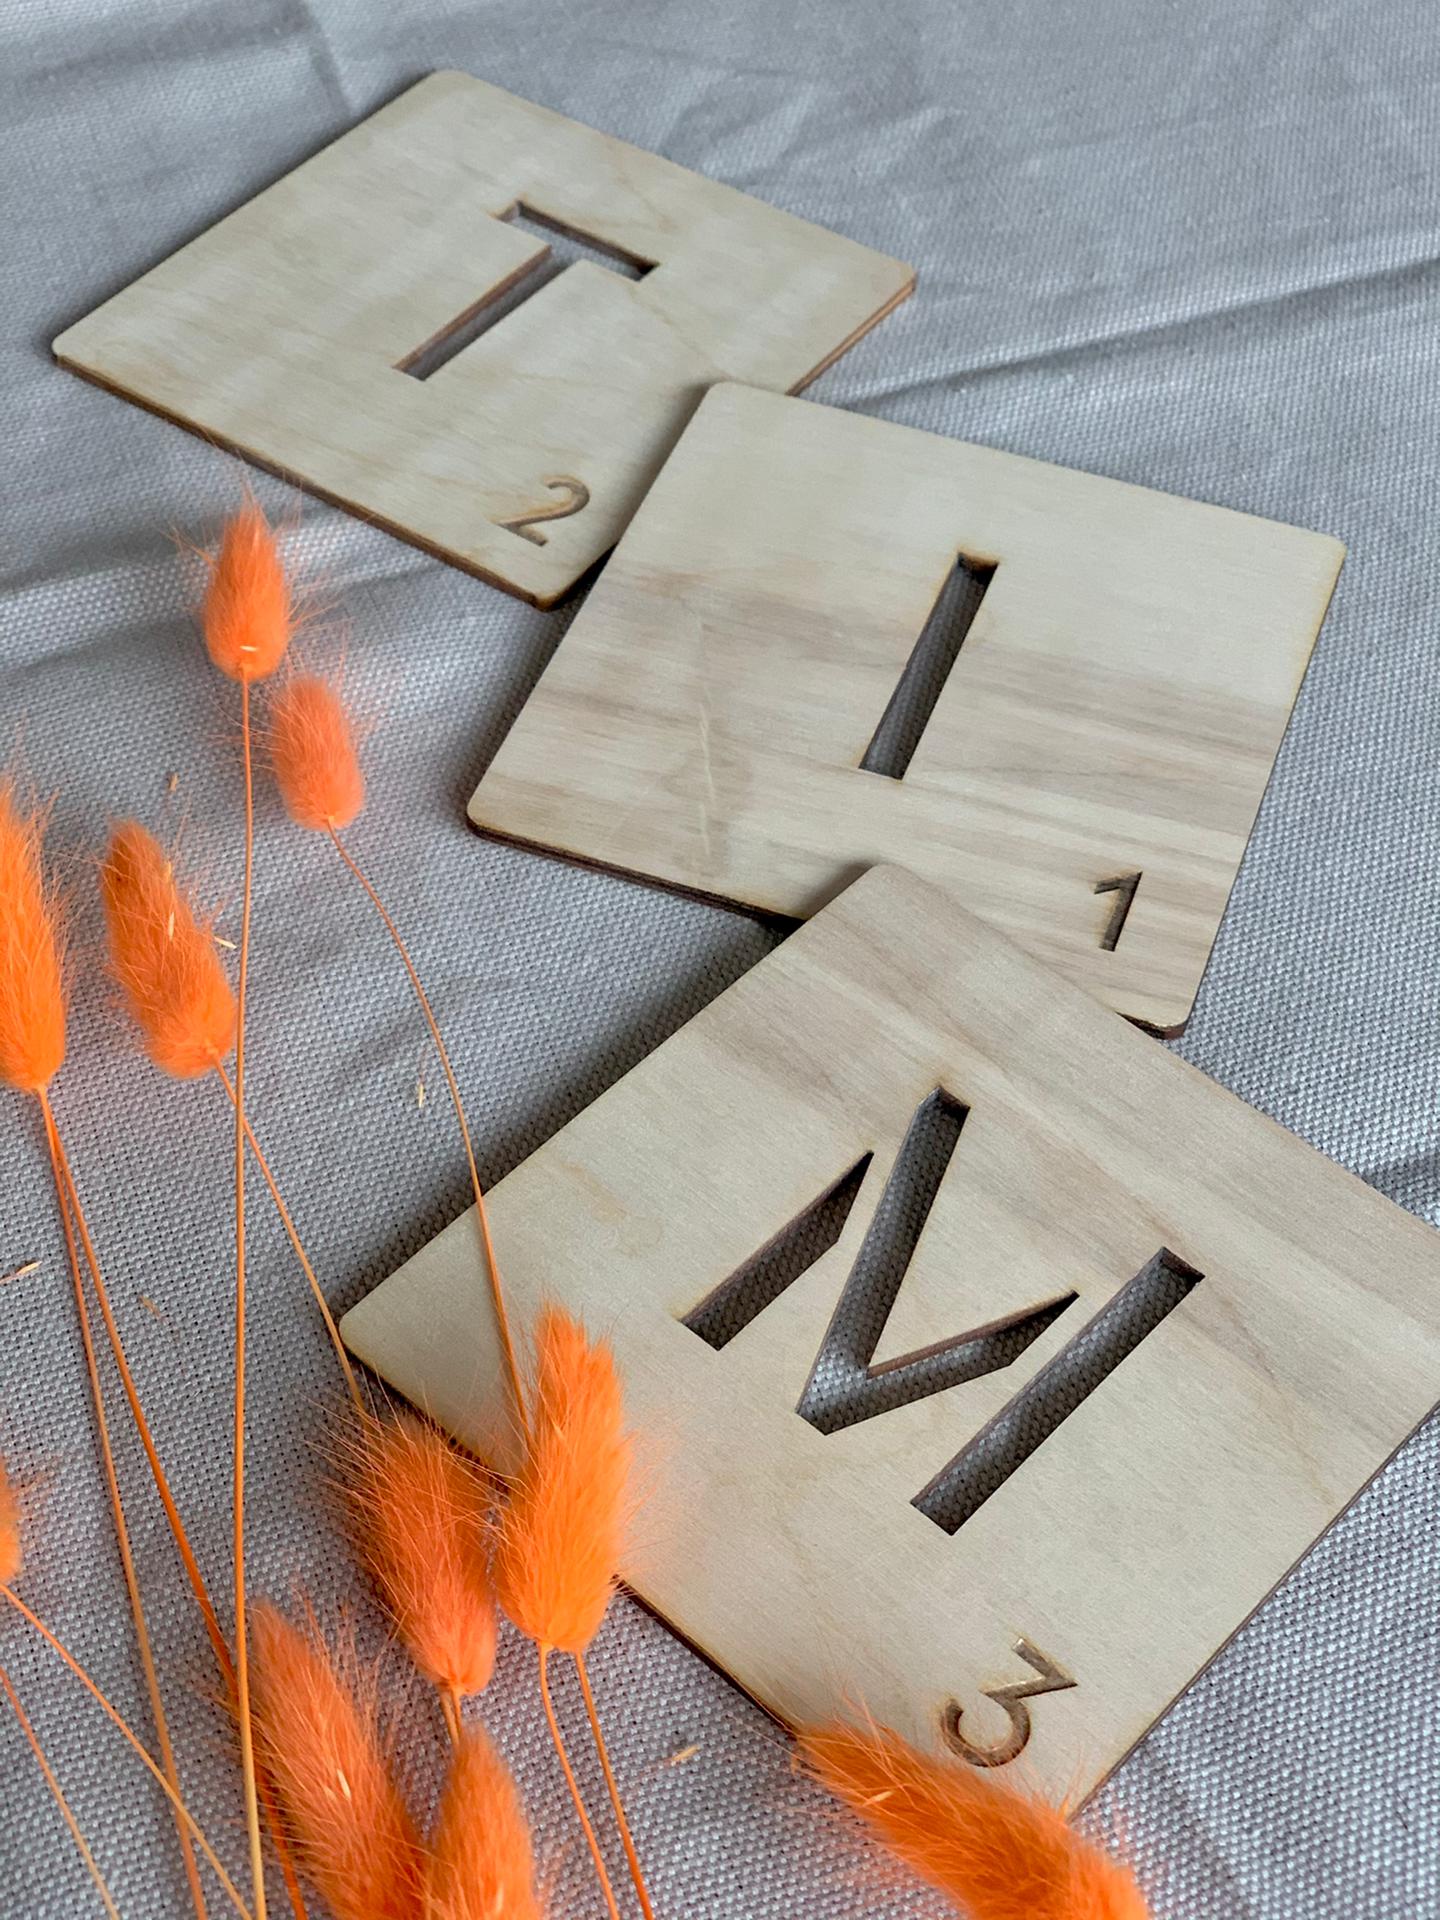 WOODEN WALL DECORATION - LETTER TILES - Wordfeud - Woordfeud